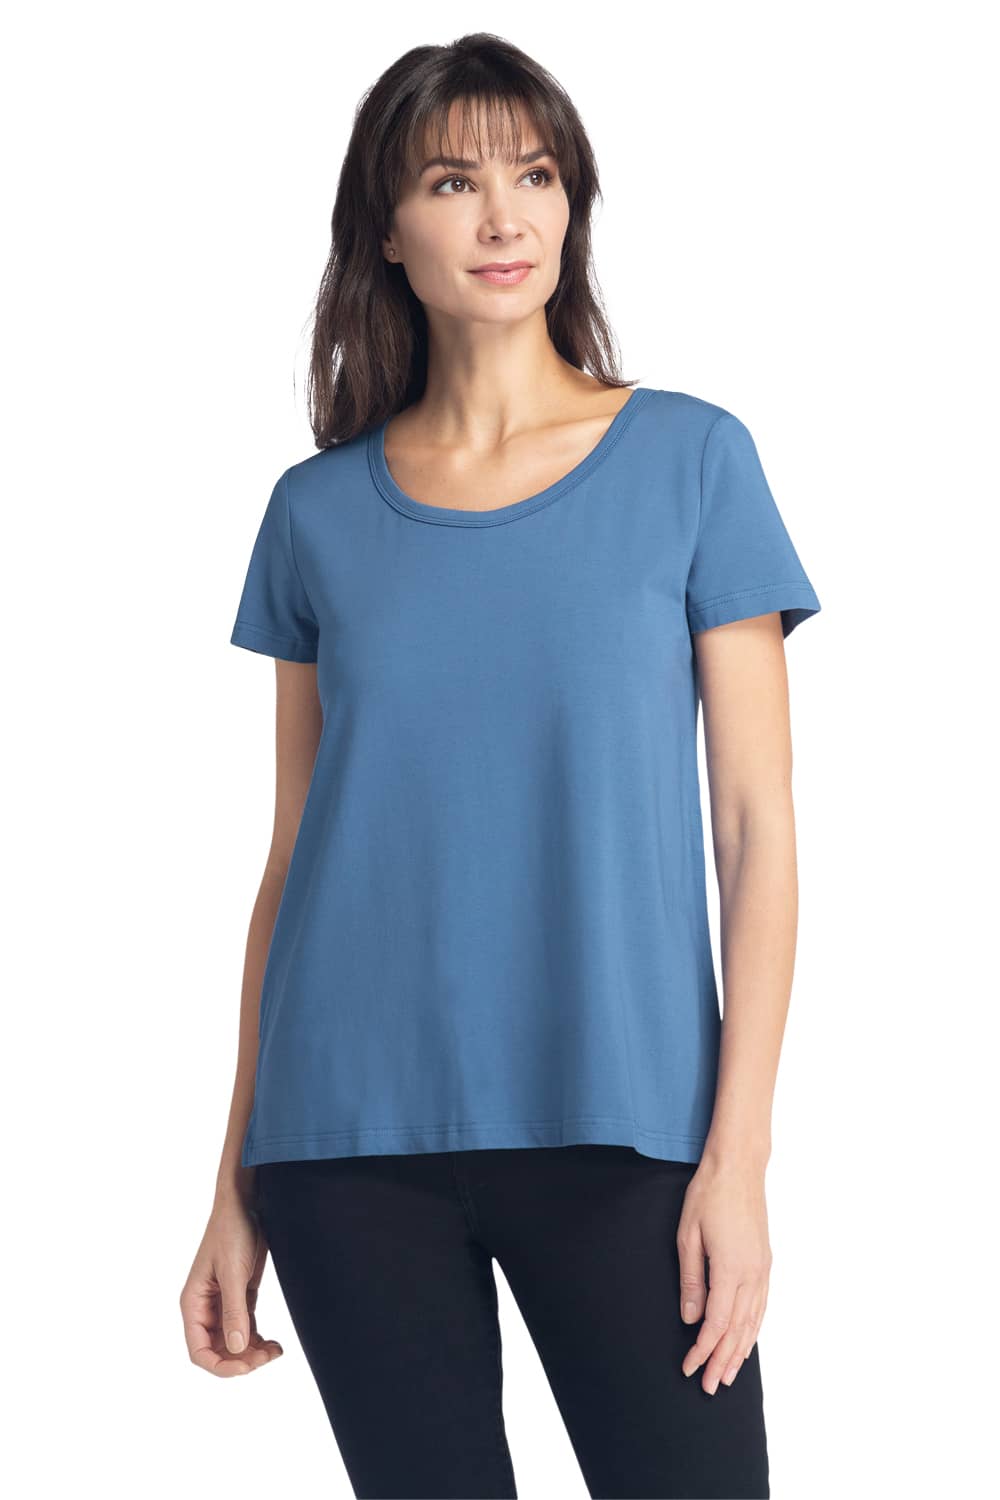 Womens Yoga Tops - Workout Tops & Activewear